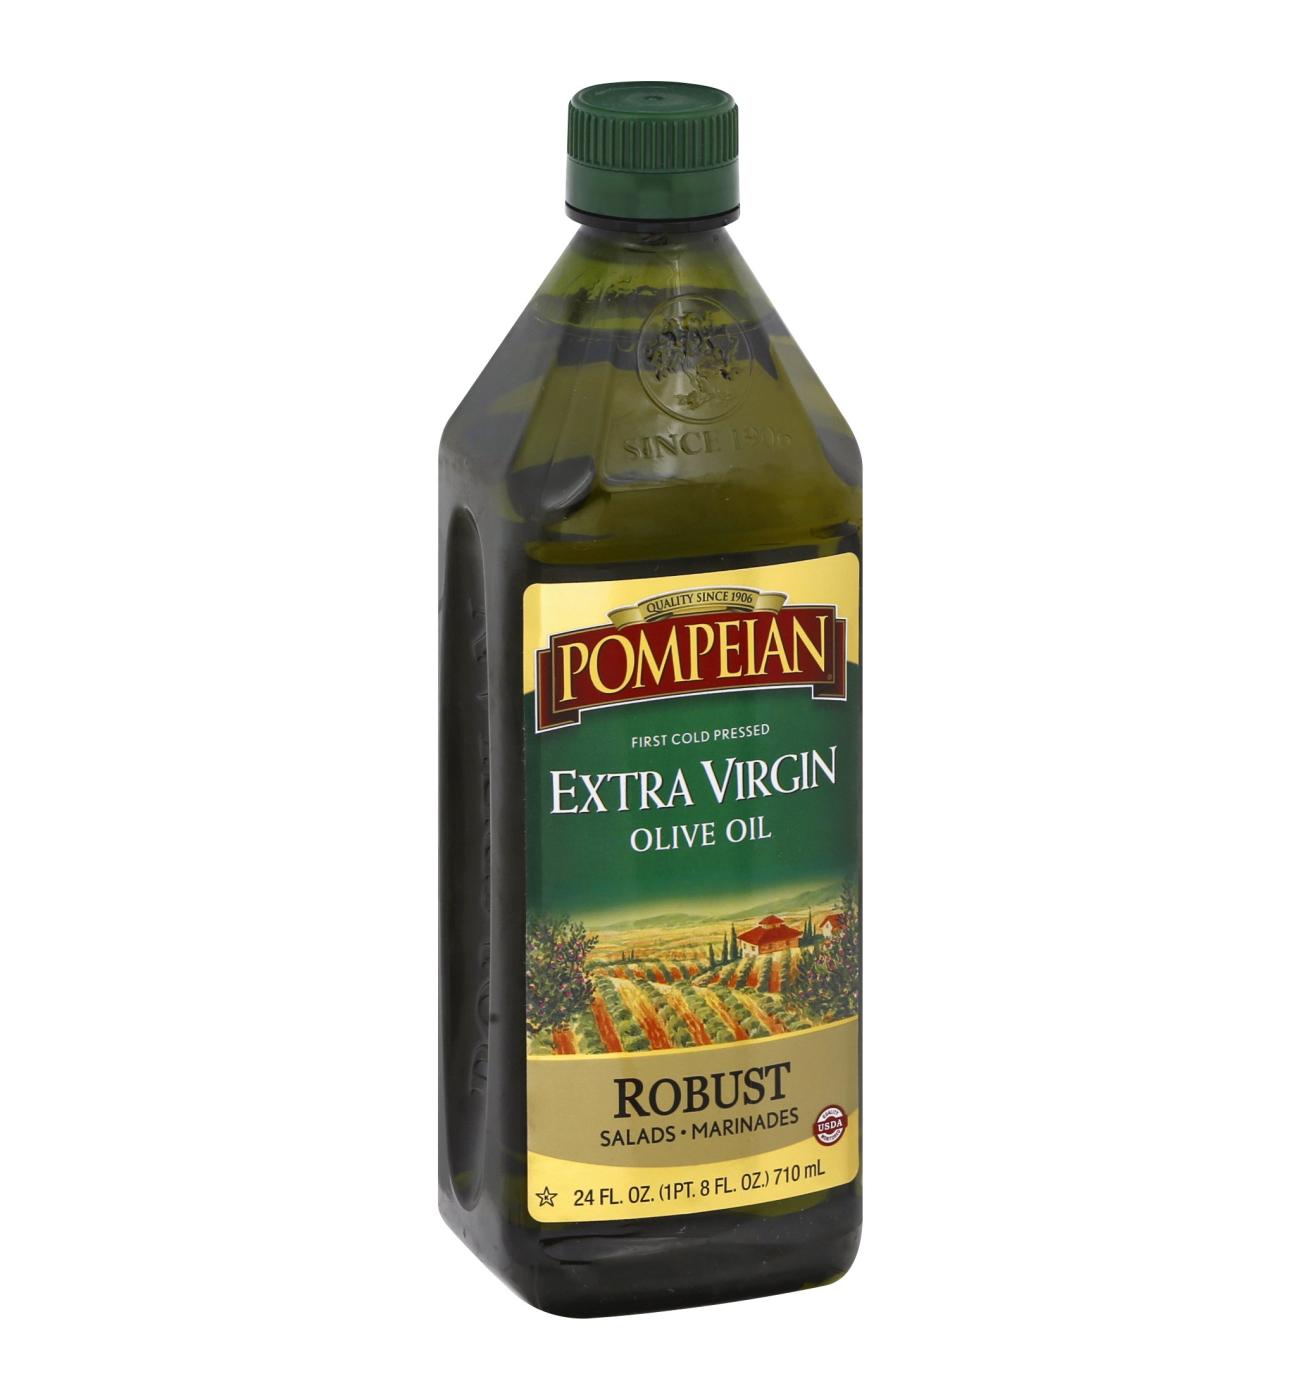 Pompeian Robust Extra Virgin Olive Oil; image 2 of 2